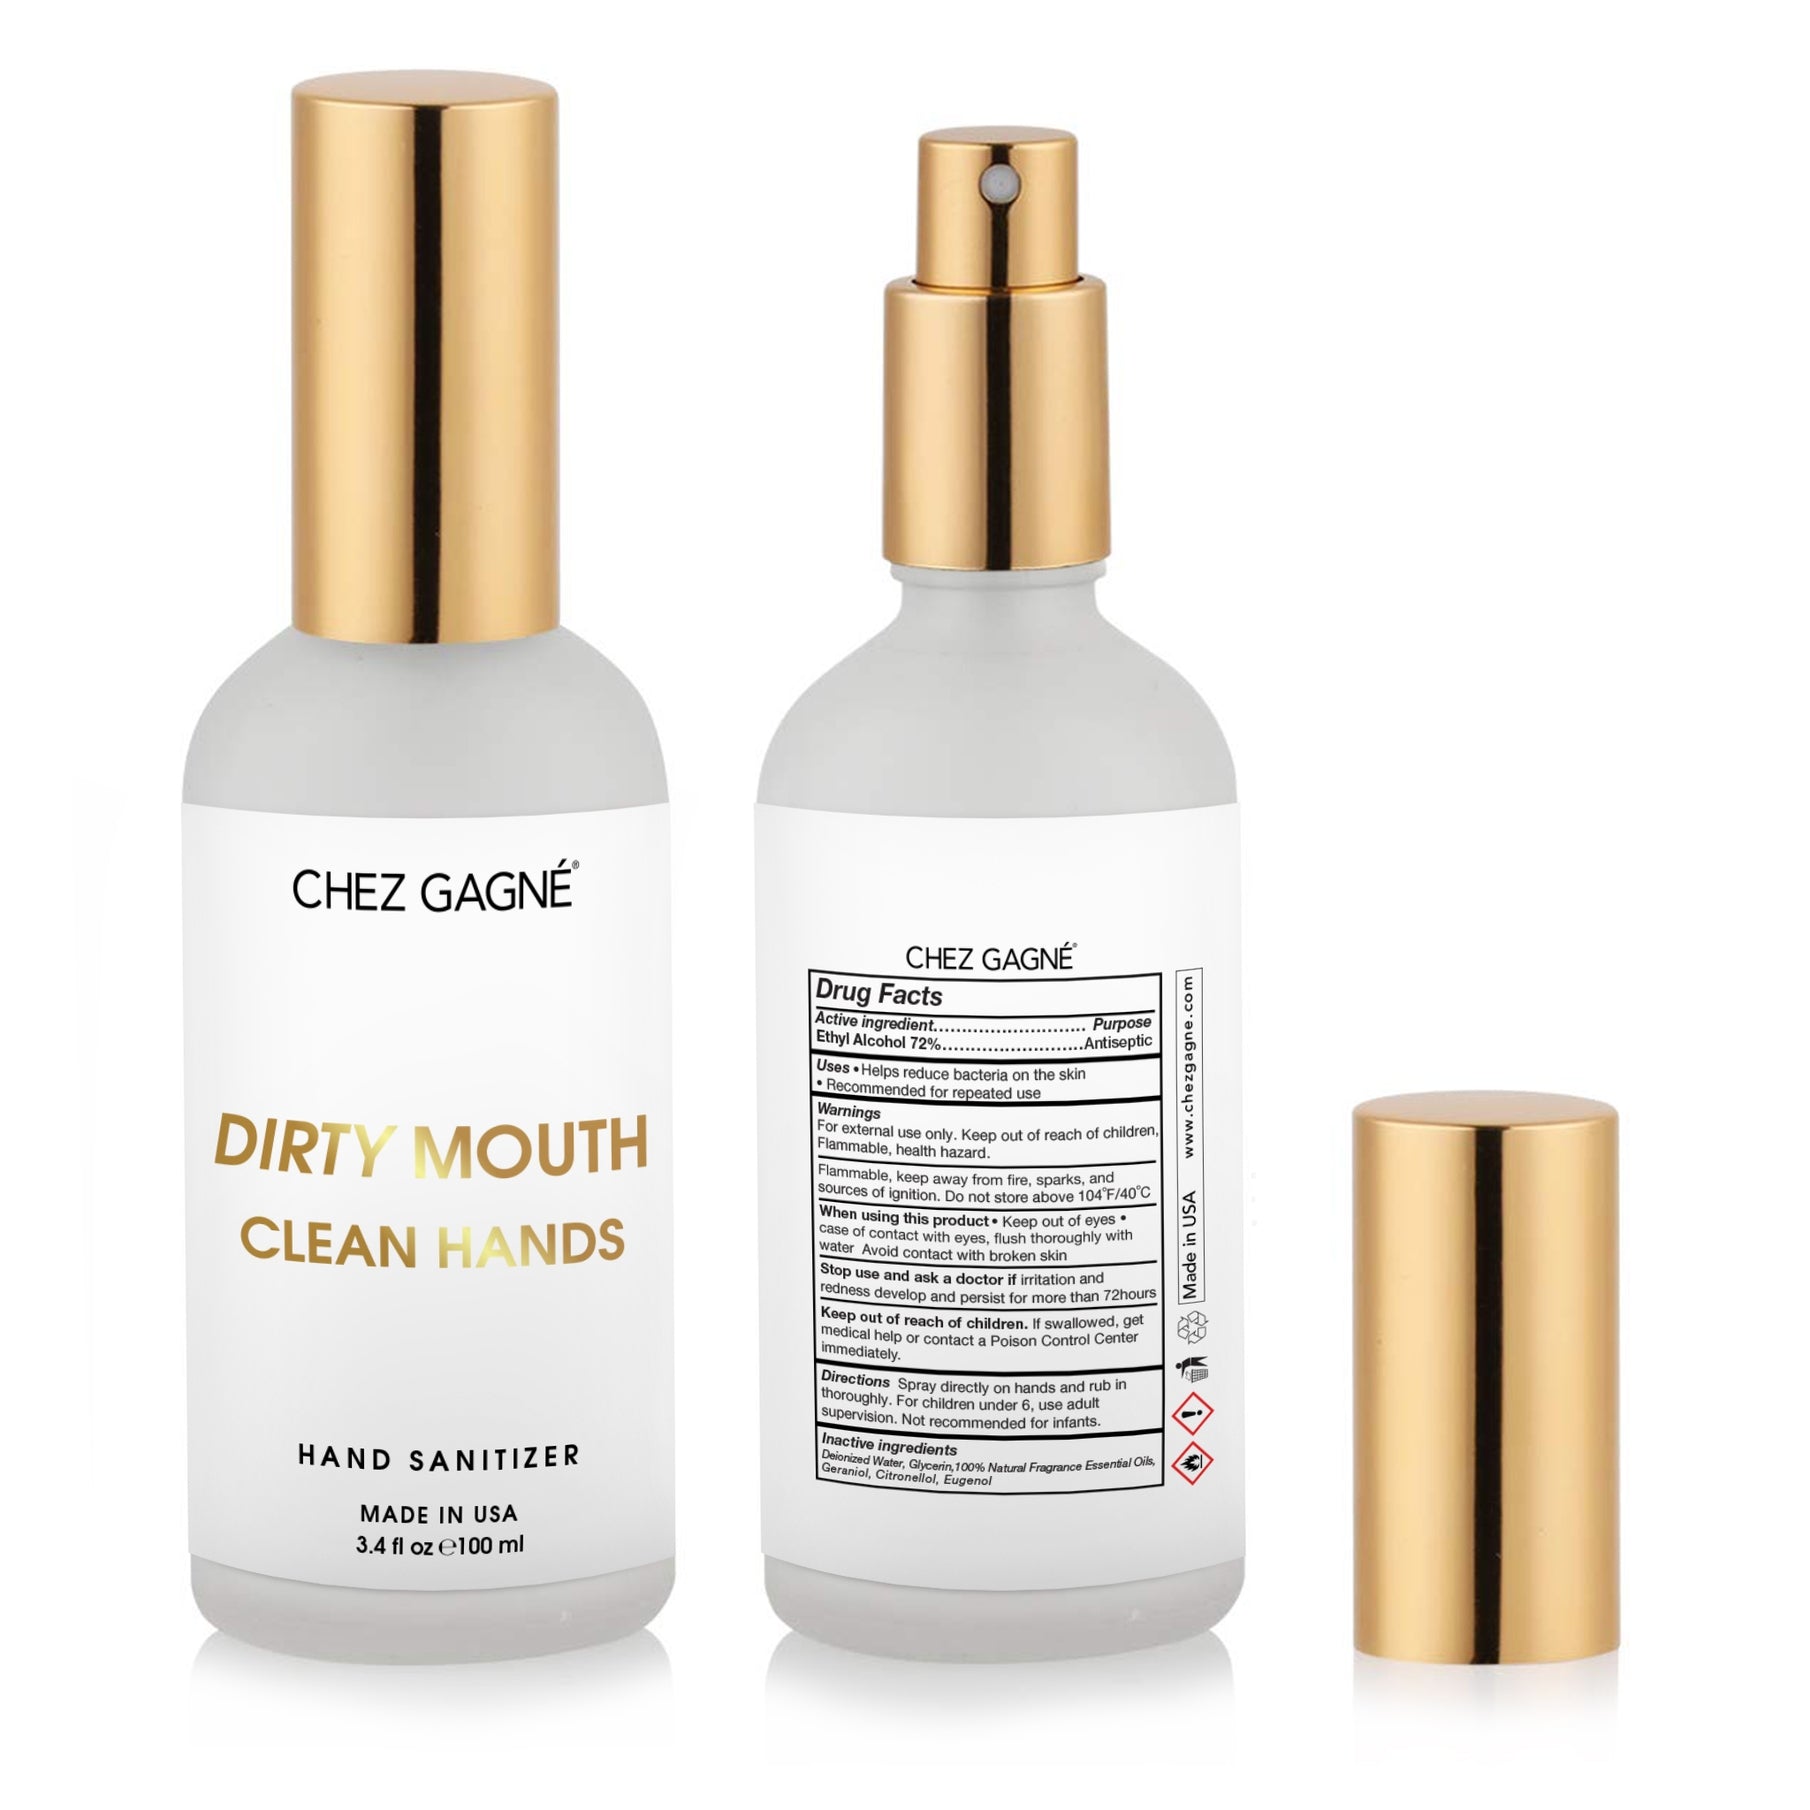 Chez Gagné Hand Sanitizer - Dirty Mouth Clean Hands